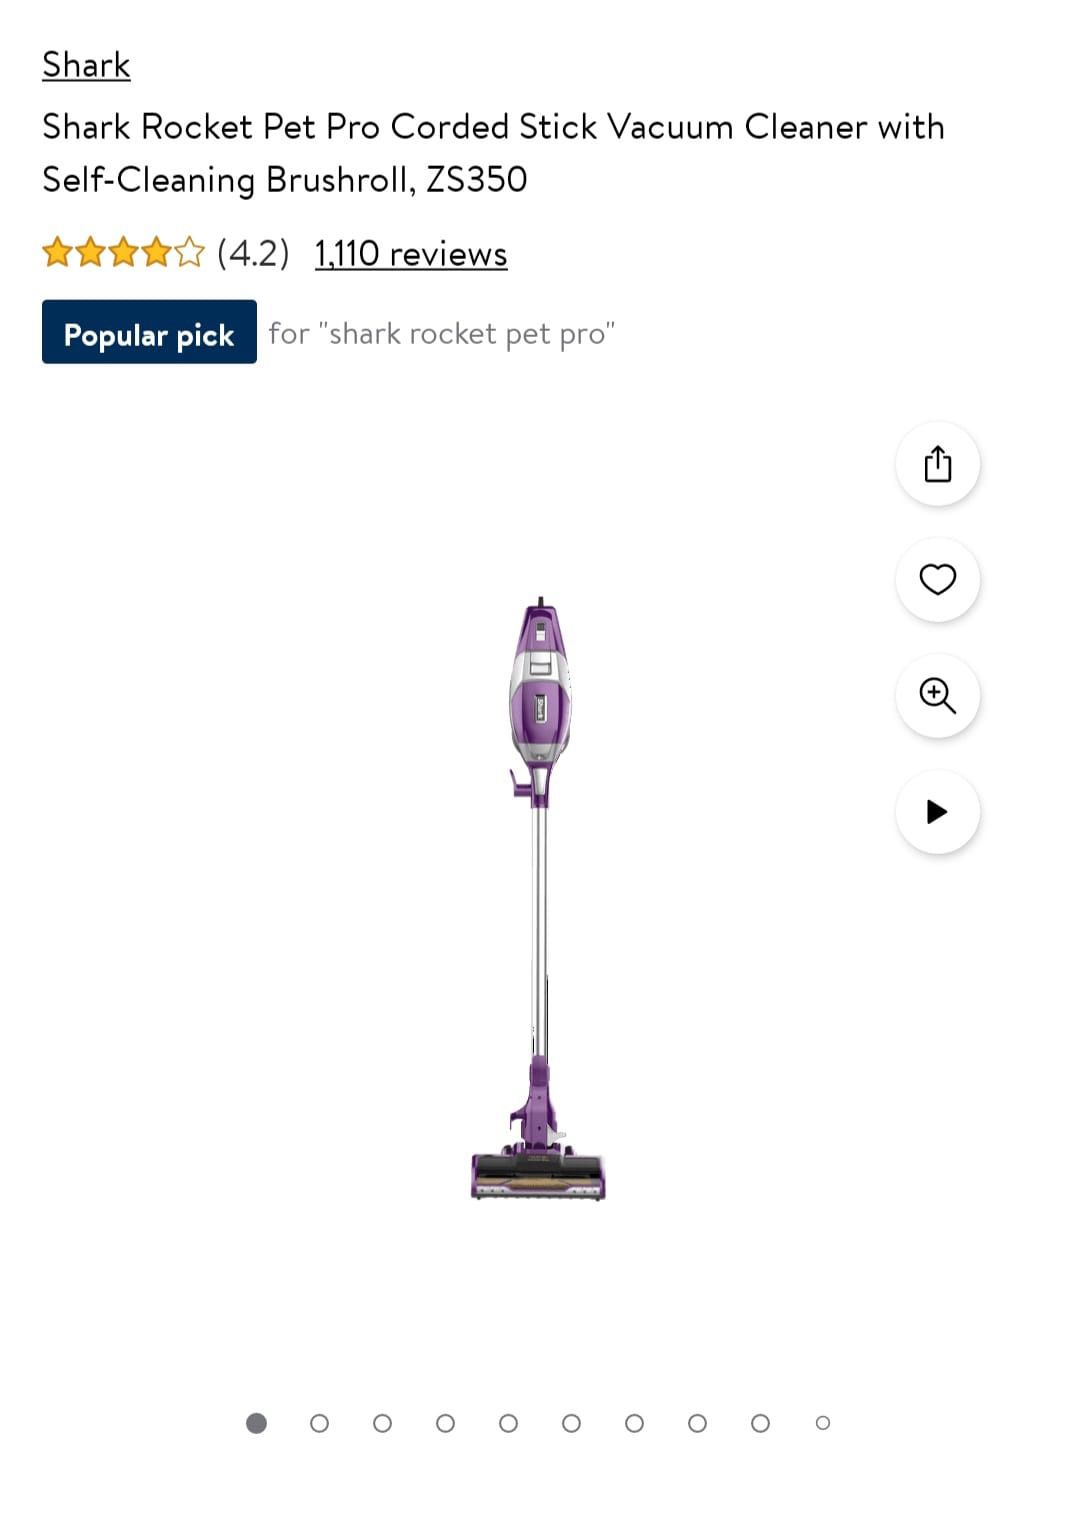 Shark Rocket Pet Pro Corded Stick Vacuum Cleaner with Self-Cleaning Brushroll, ZS350 - NEW